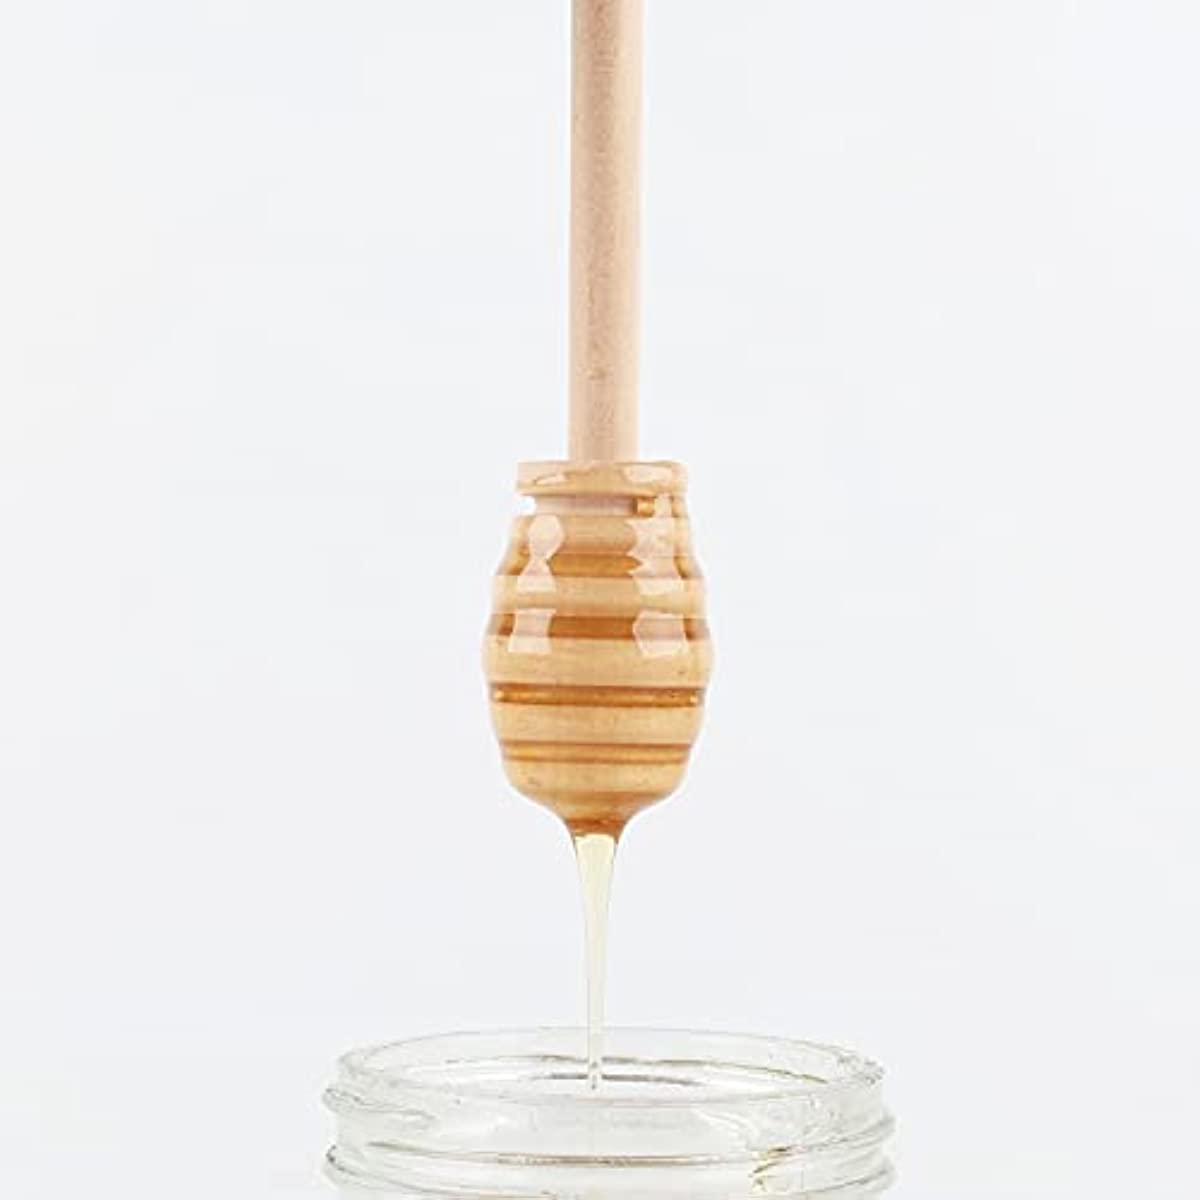 3 Inch Honey Dipper Sticks, 3 Pcs Mini Wooden Honeycomb Stick, Small Honey Spoons Stirrer Stick for Honey Jar Dispense Drizzle Honey and Wedding Party Favors Gift